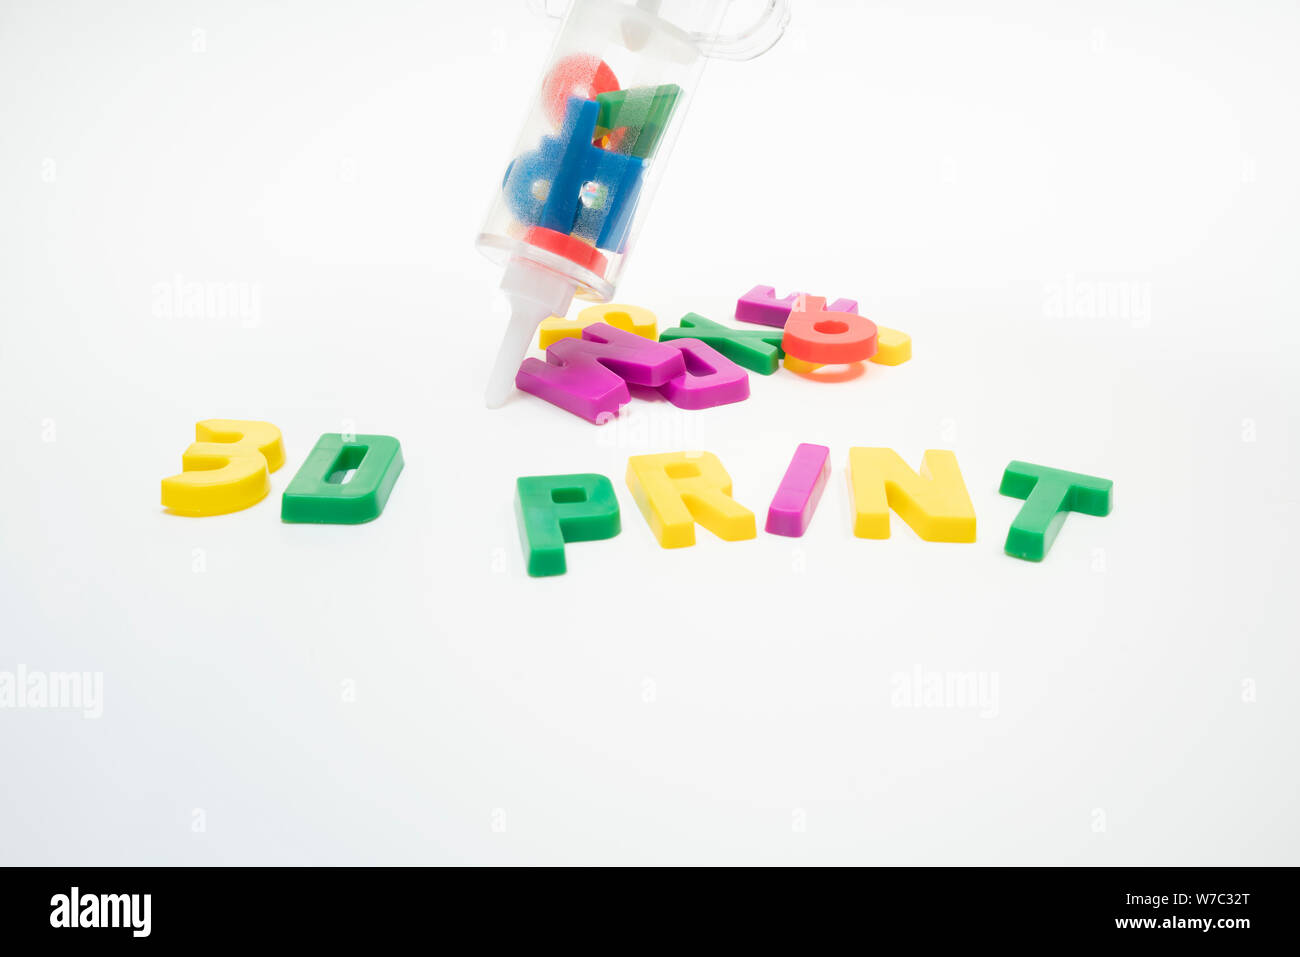 conceptual and illustrative 3D printing shot. a plastic syringe full of plastic letters and numbers next to some others spelling out 3D PRINT Stock Photo